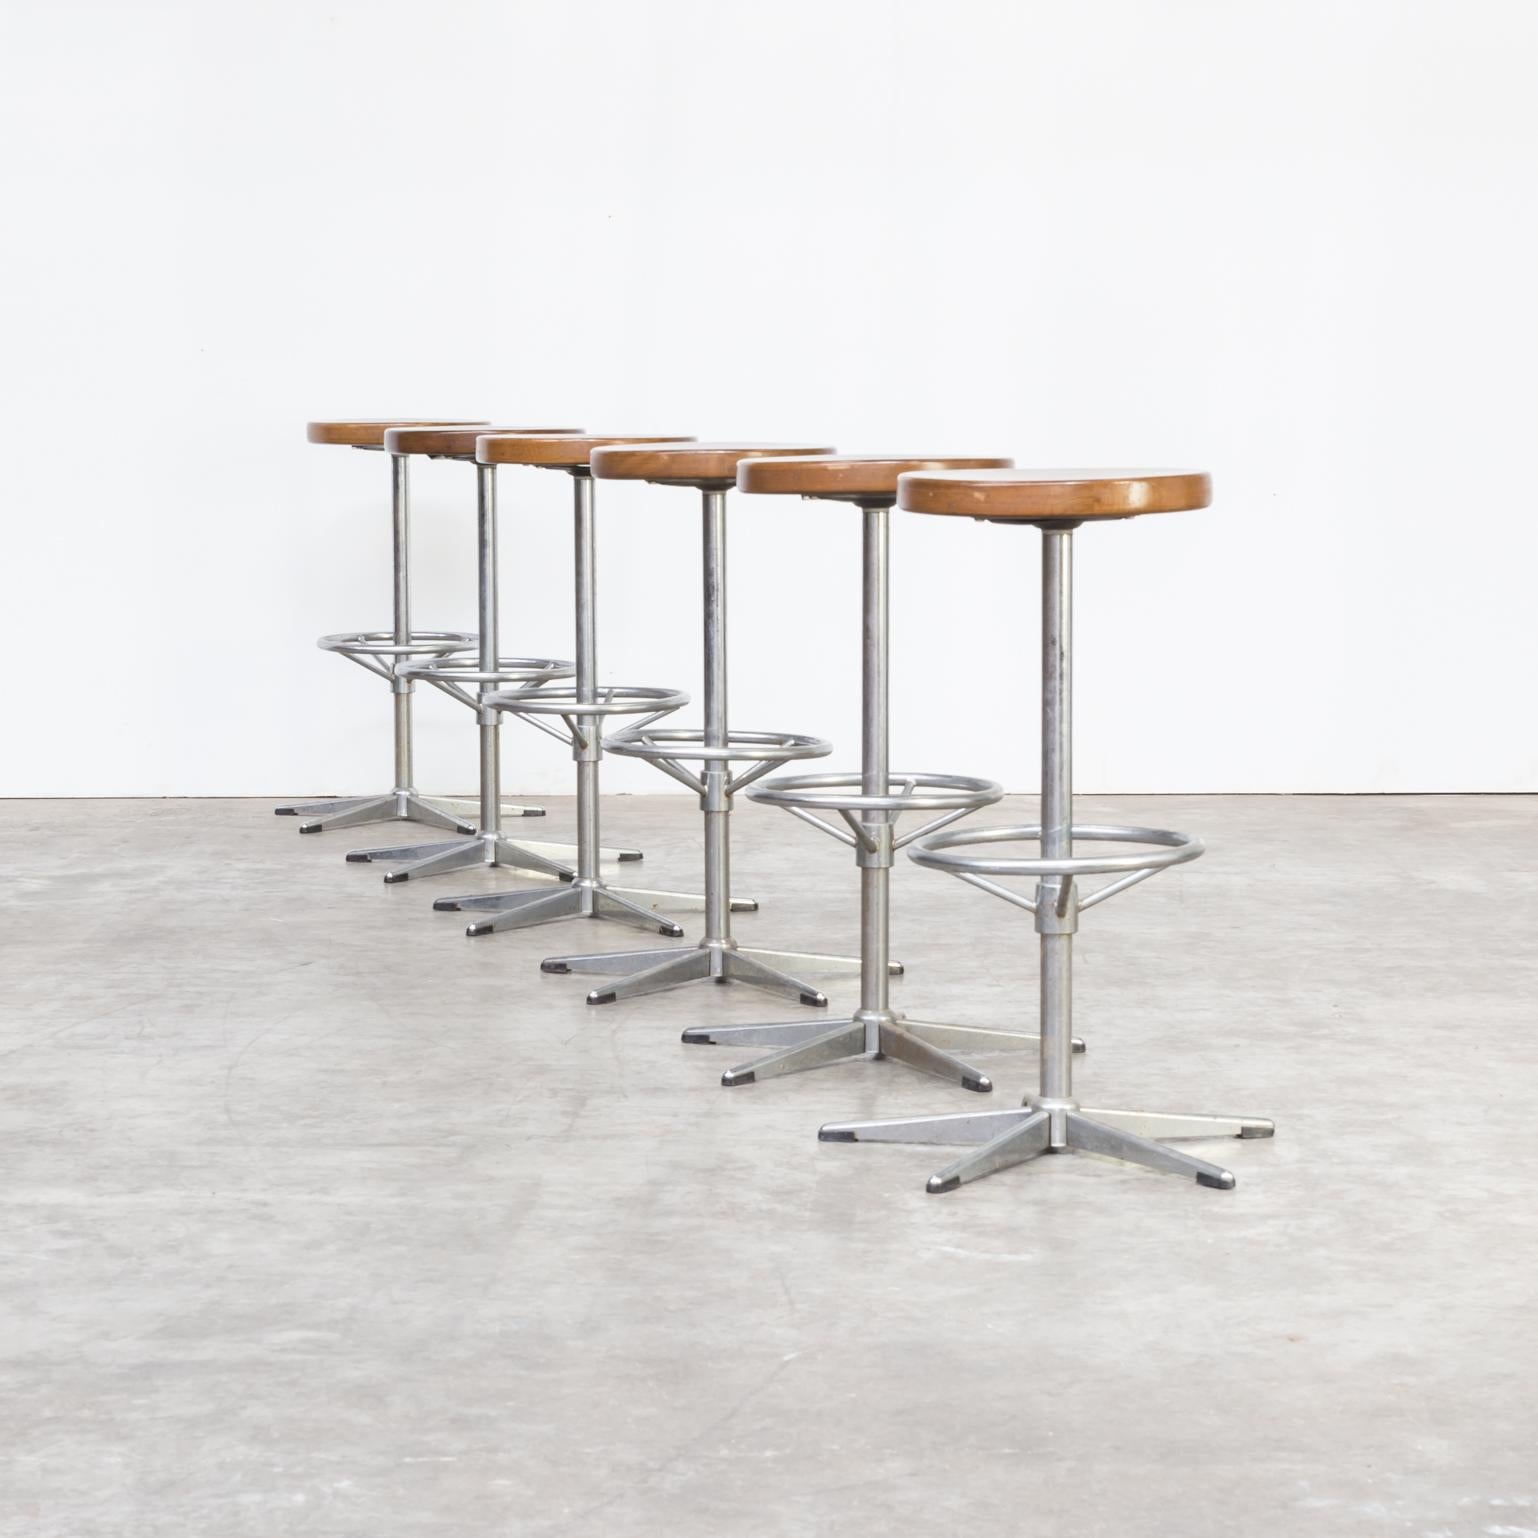 One set of six midcentury chrome framed stools with wooden seat. Good condition consistent with age and use.